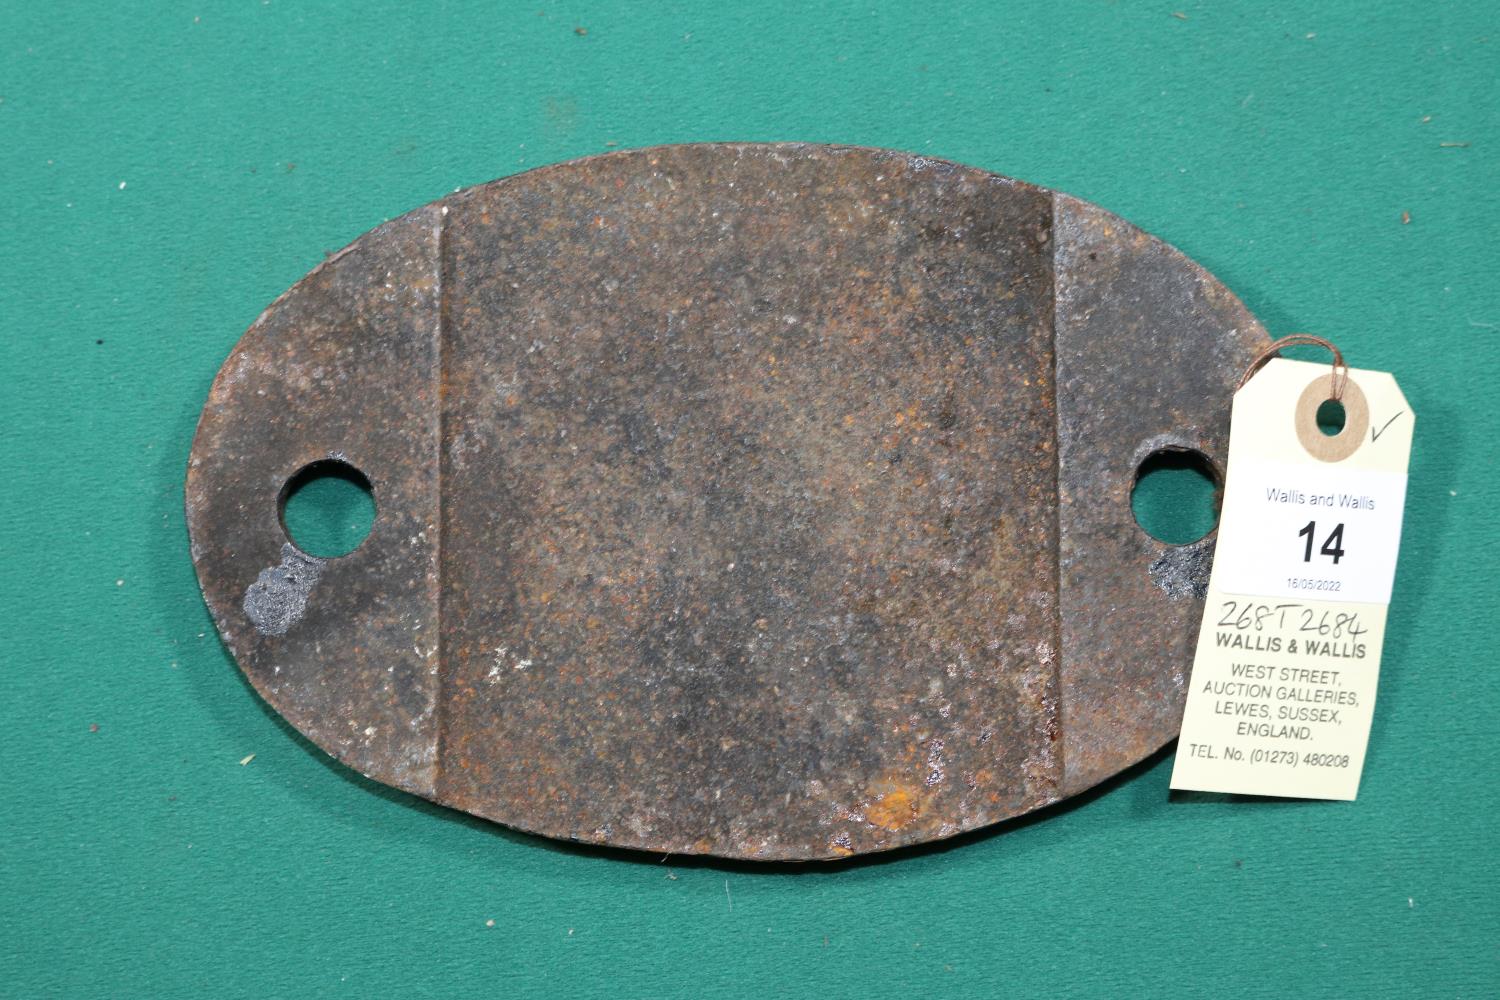 Locomotive shedplate 1A Willesden 1950-1973. Cast iron plate in good, believed to be unrestored, - Image 2 of 2